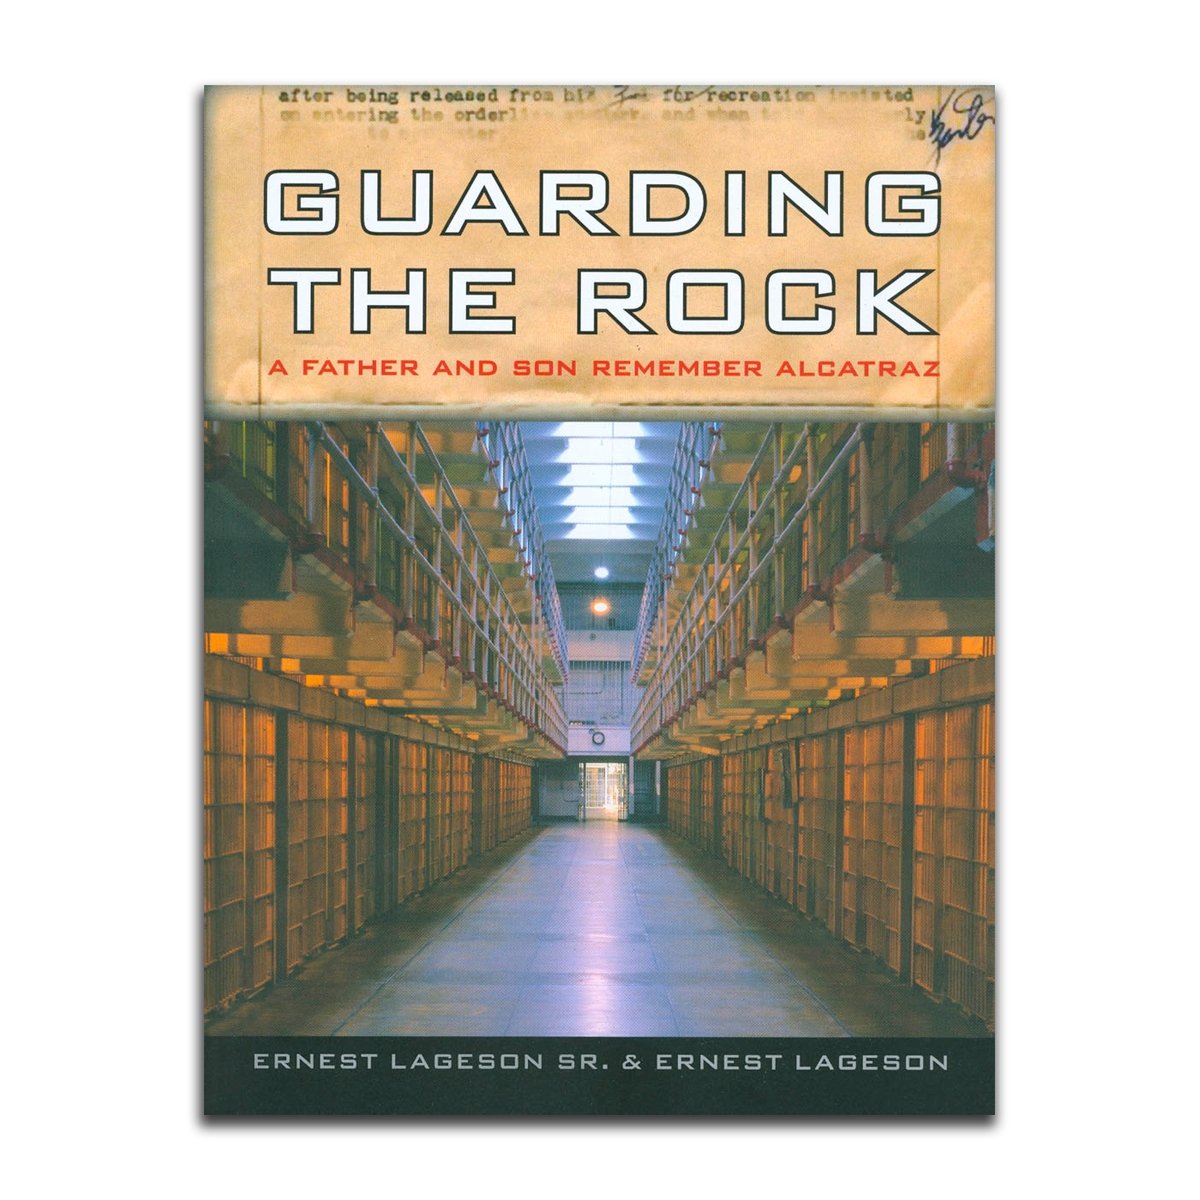 Guarding the Rock book by Ernest Lageson Sr. and Ernest Lageson, US Penitentiary Alcatraz memoir.